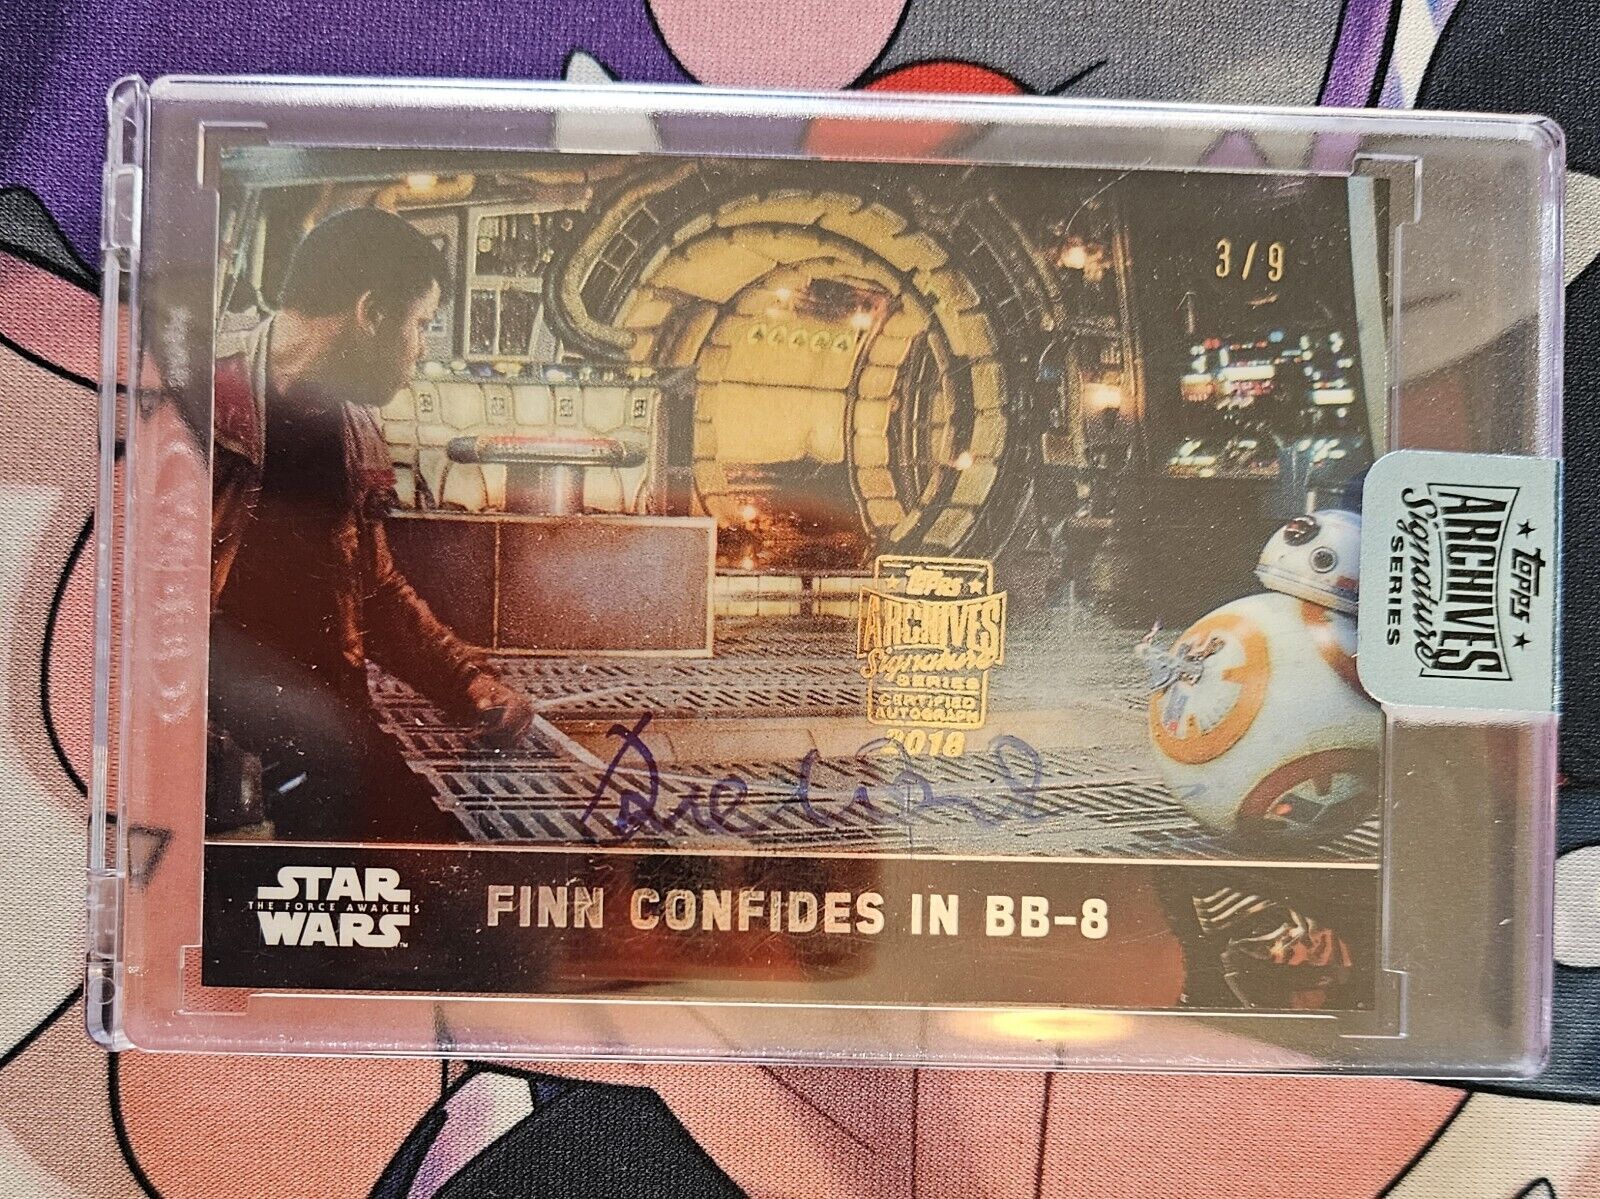 2018 Topps Archives Star Wars Signature Series 3/9 Auto 